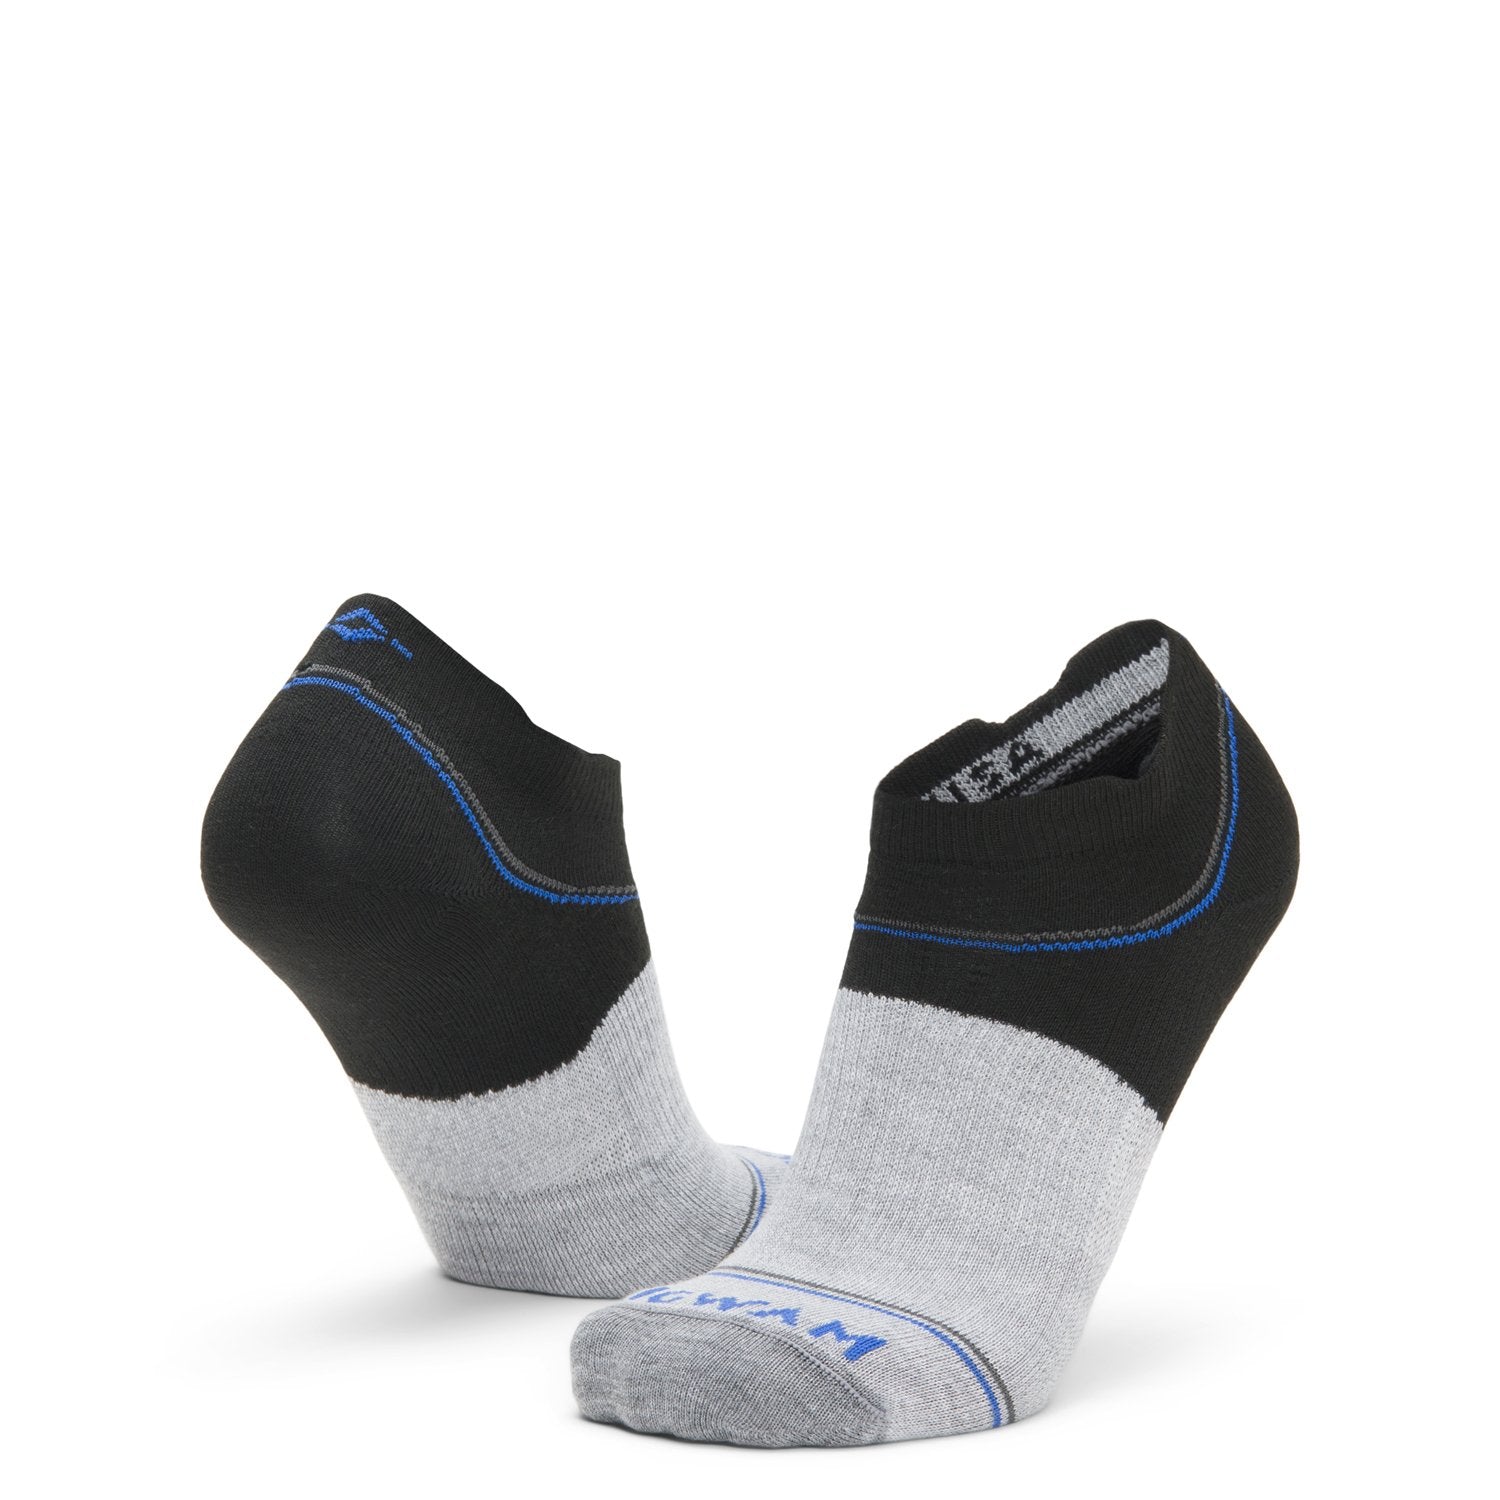 Surpass Ultra Lightweight Low Sock - Black/Grey full product perspective - made in The USA Wigwam Socks